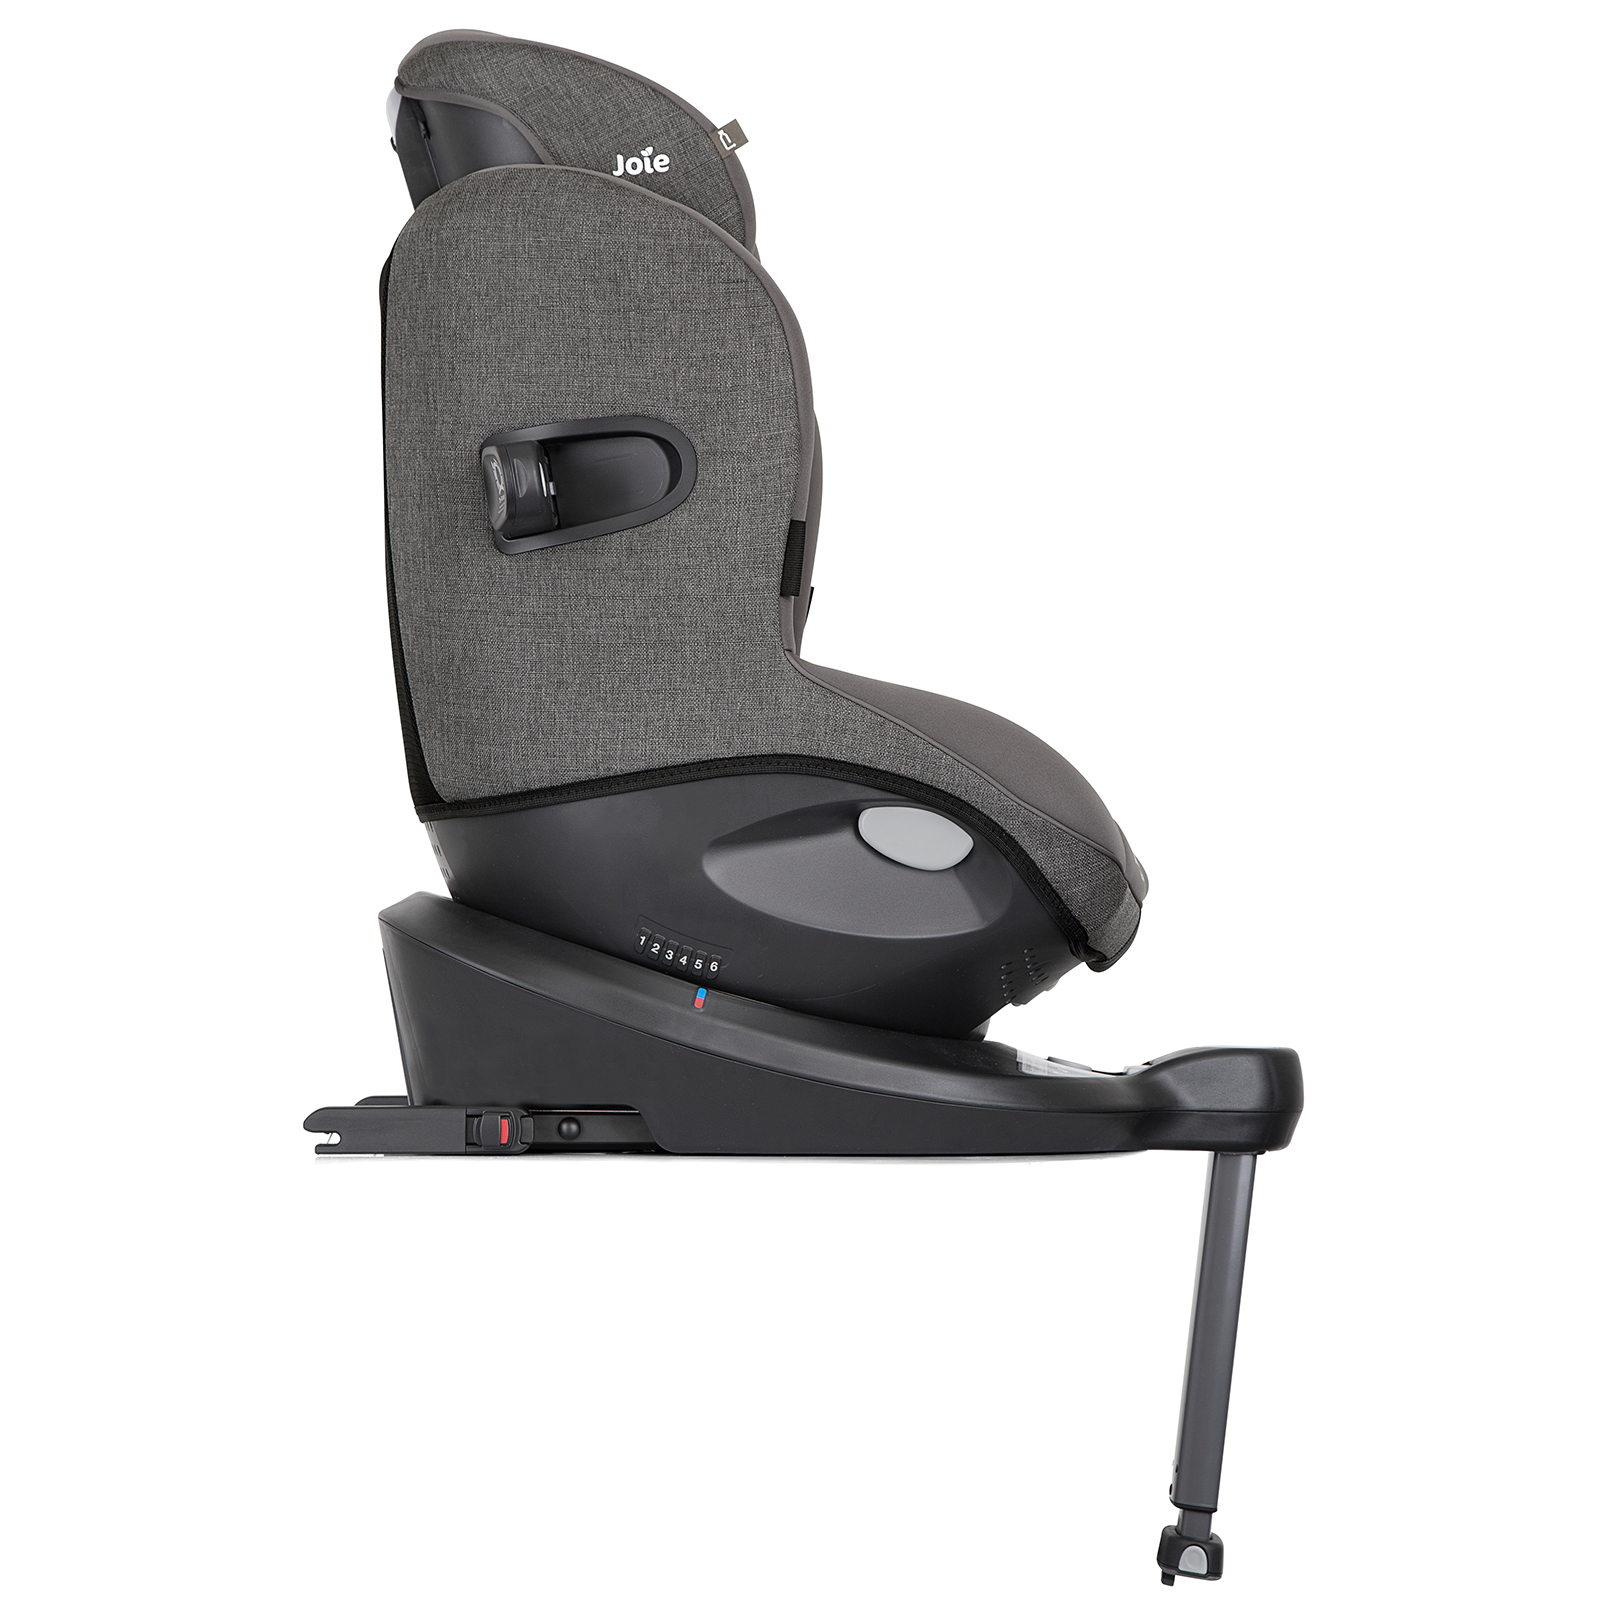 Joie i-Spin 360 review - Car seats from birth - Car Seats